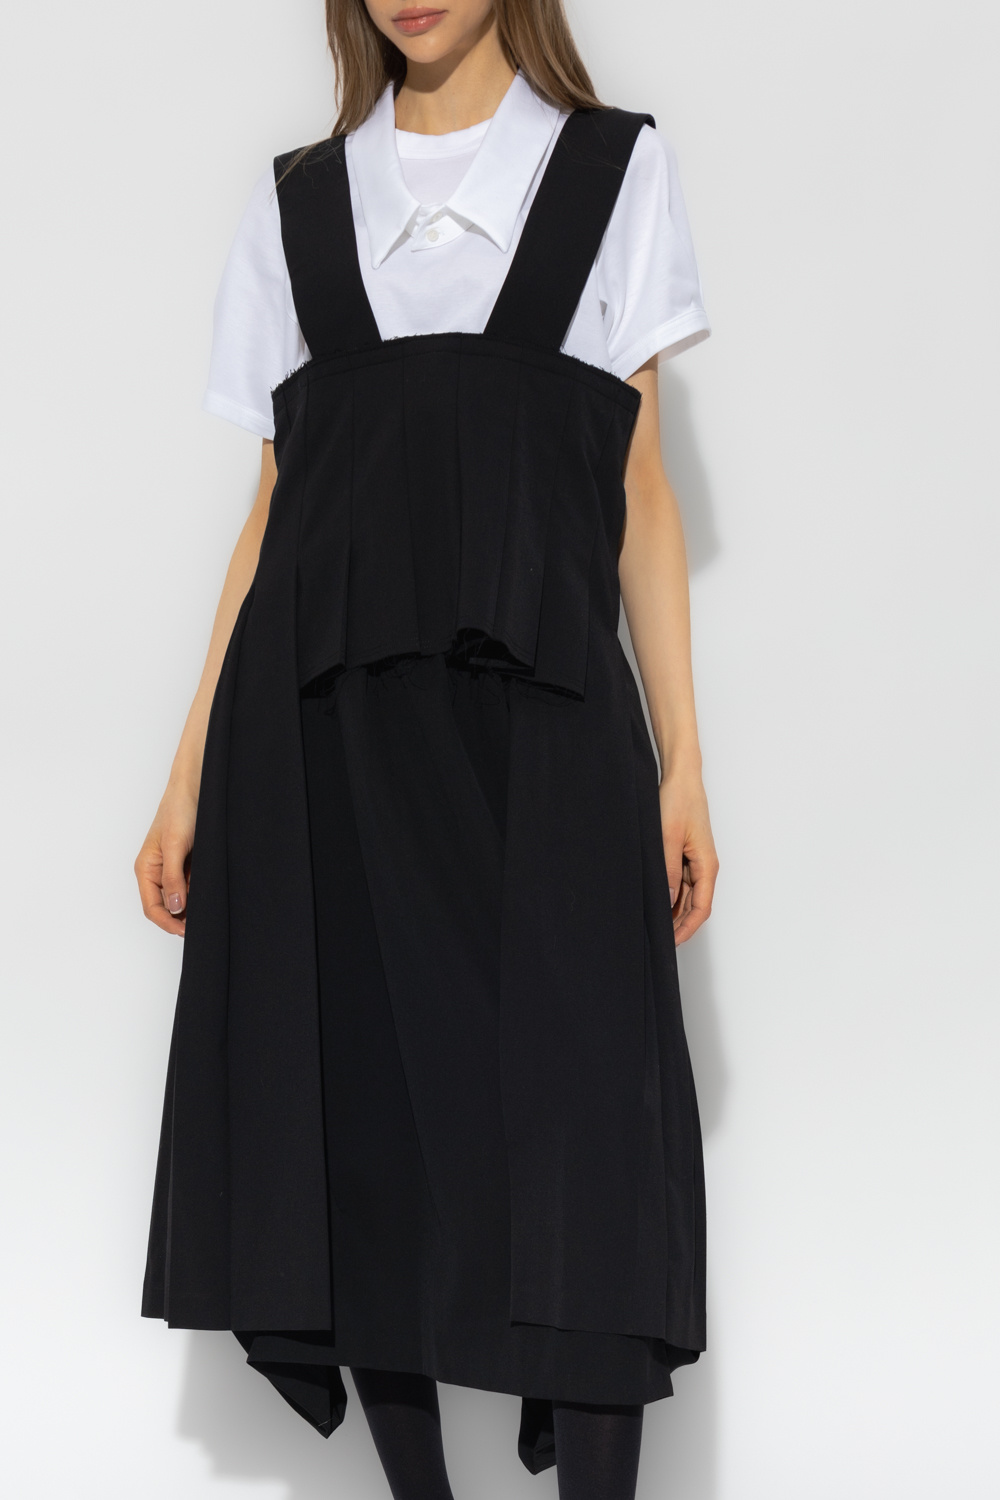 CDG by Comme des Garçons Pleated skirt